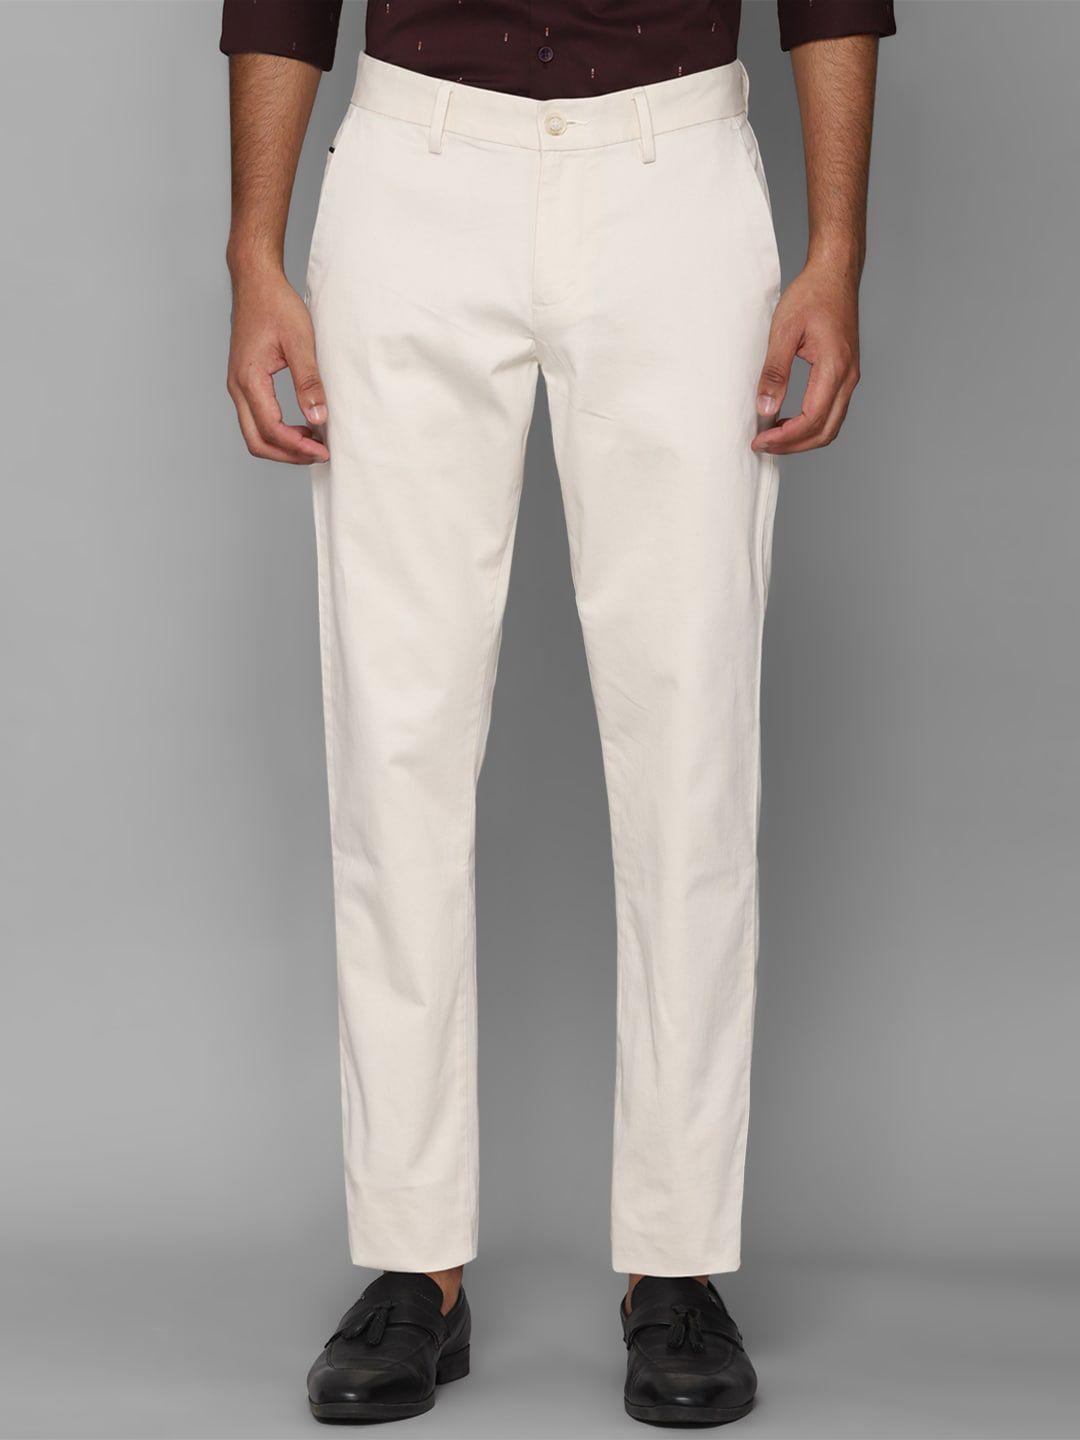 allen-solly-men-off-white-solid-slim-fit-trousers